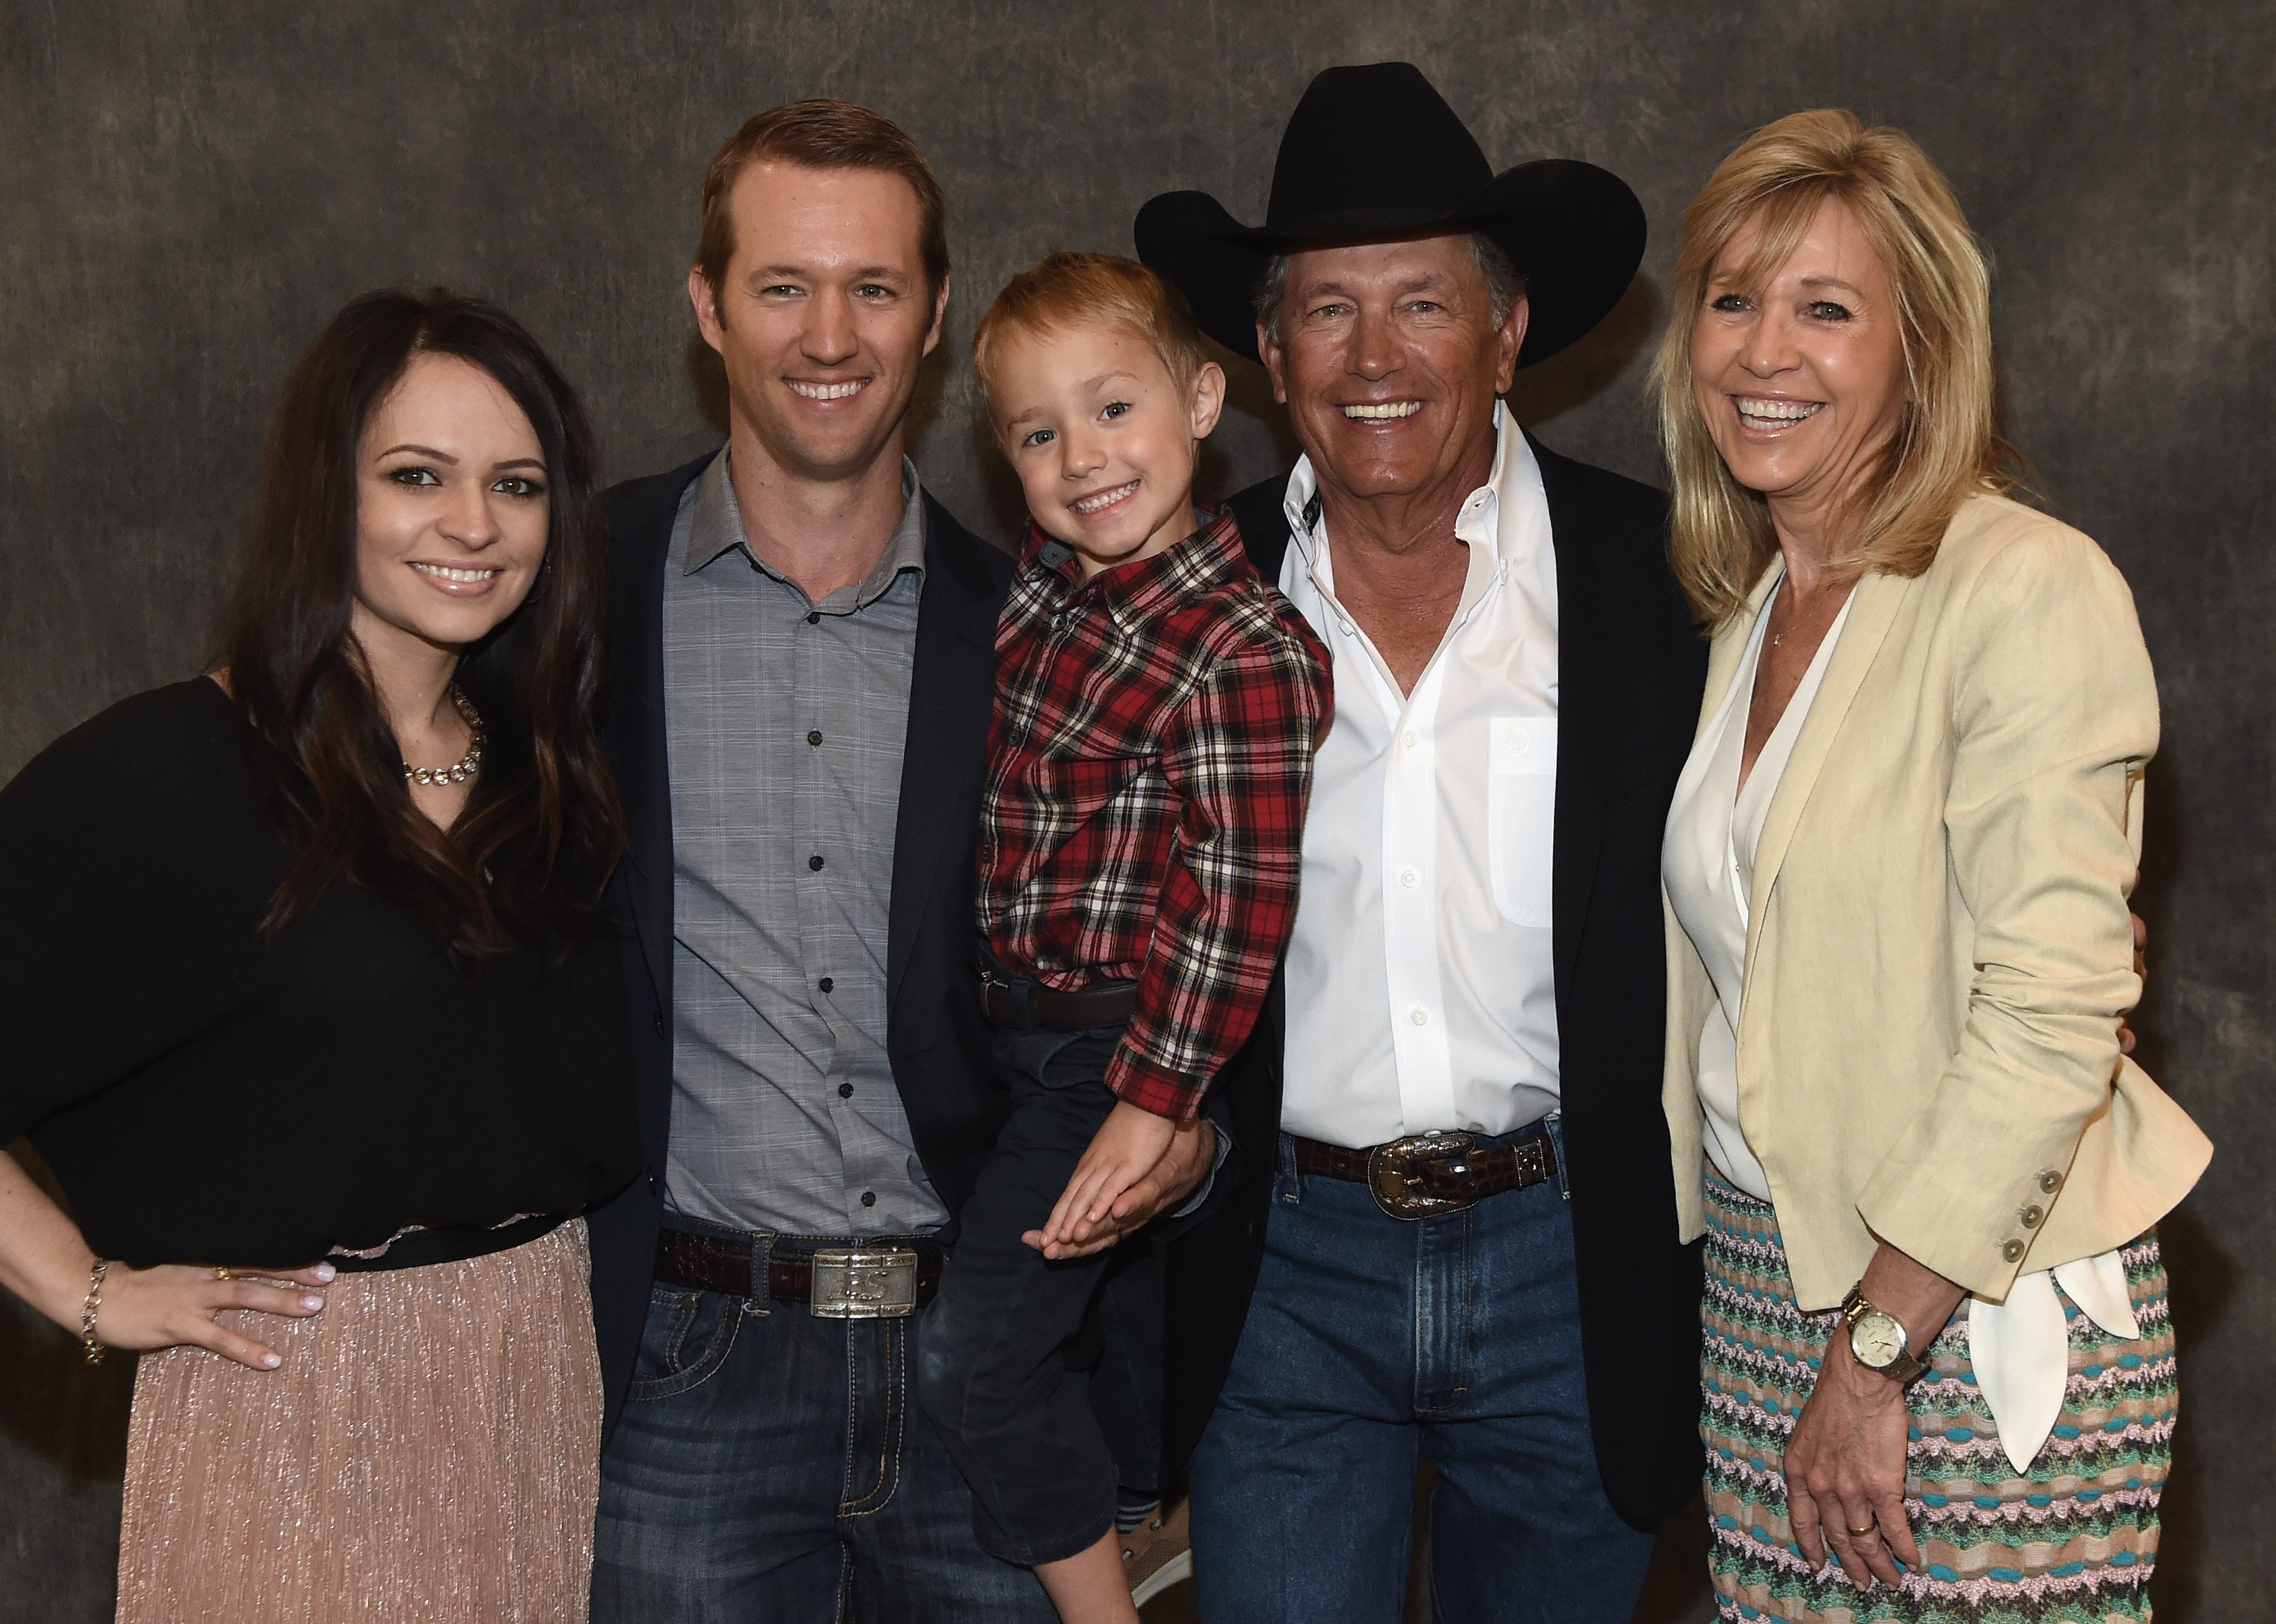 Tamara, Bubba, Harvey, George, and Norma Strait at George's honoring as Texan of the Year at New Braunfels' Chamber of Commerce on March 23, 2018, in New Braunfels, Texas | Source: Getty Images